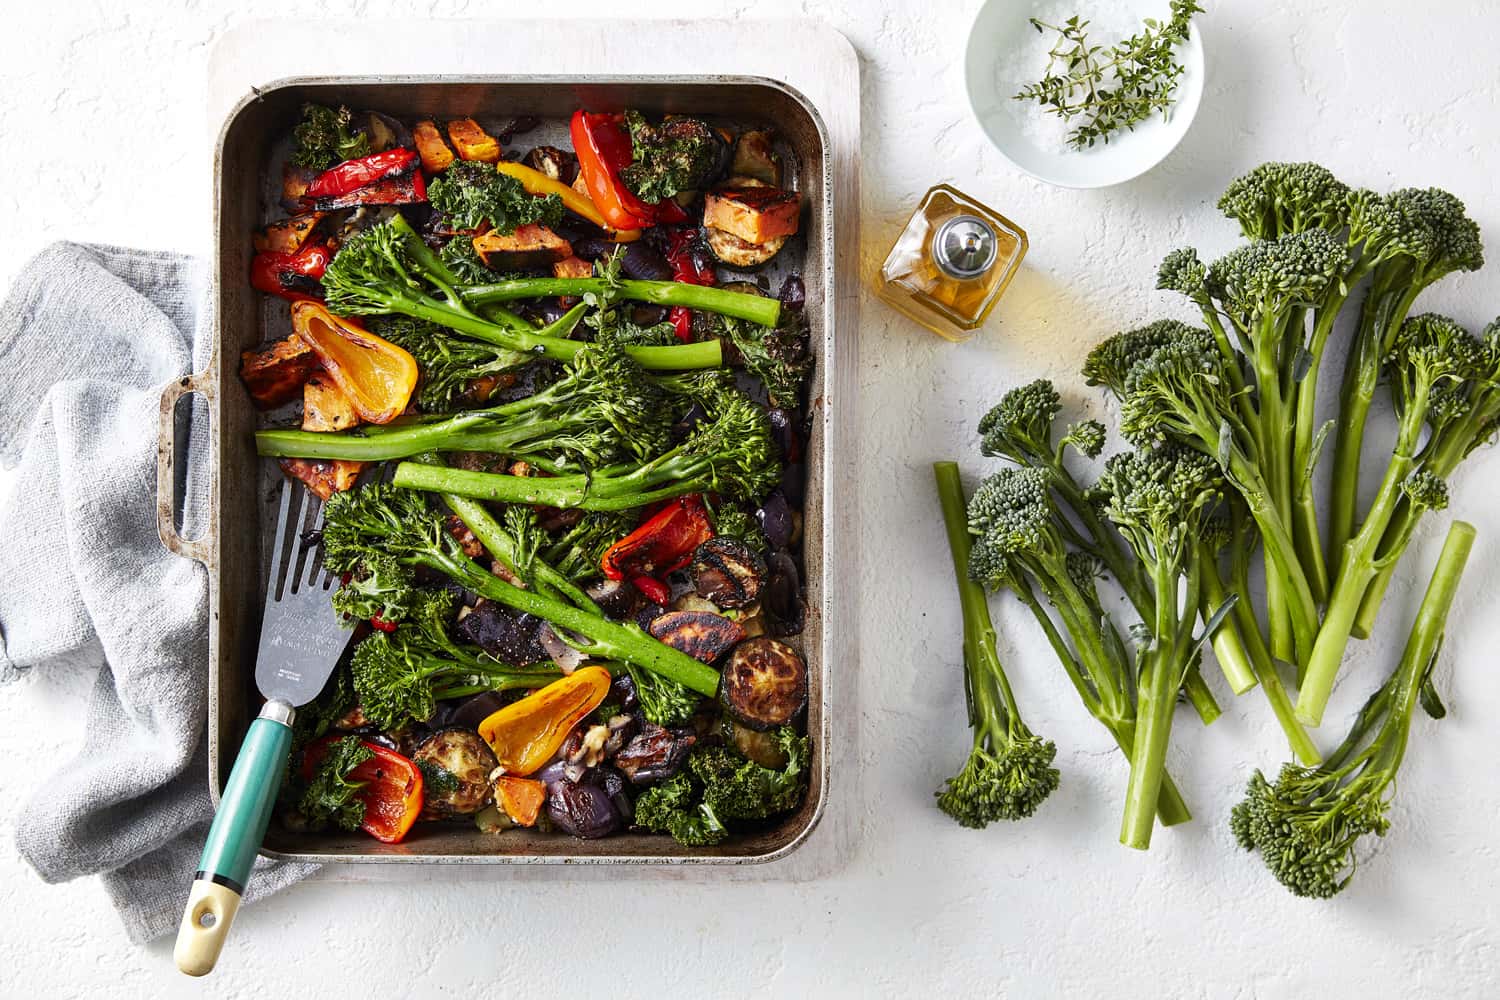 Roasted vegetables in a roasting tray with broccolini next to the tray.